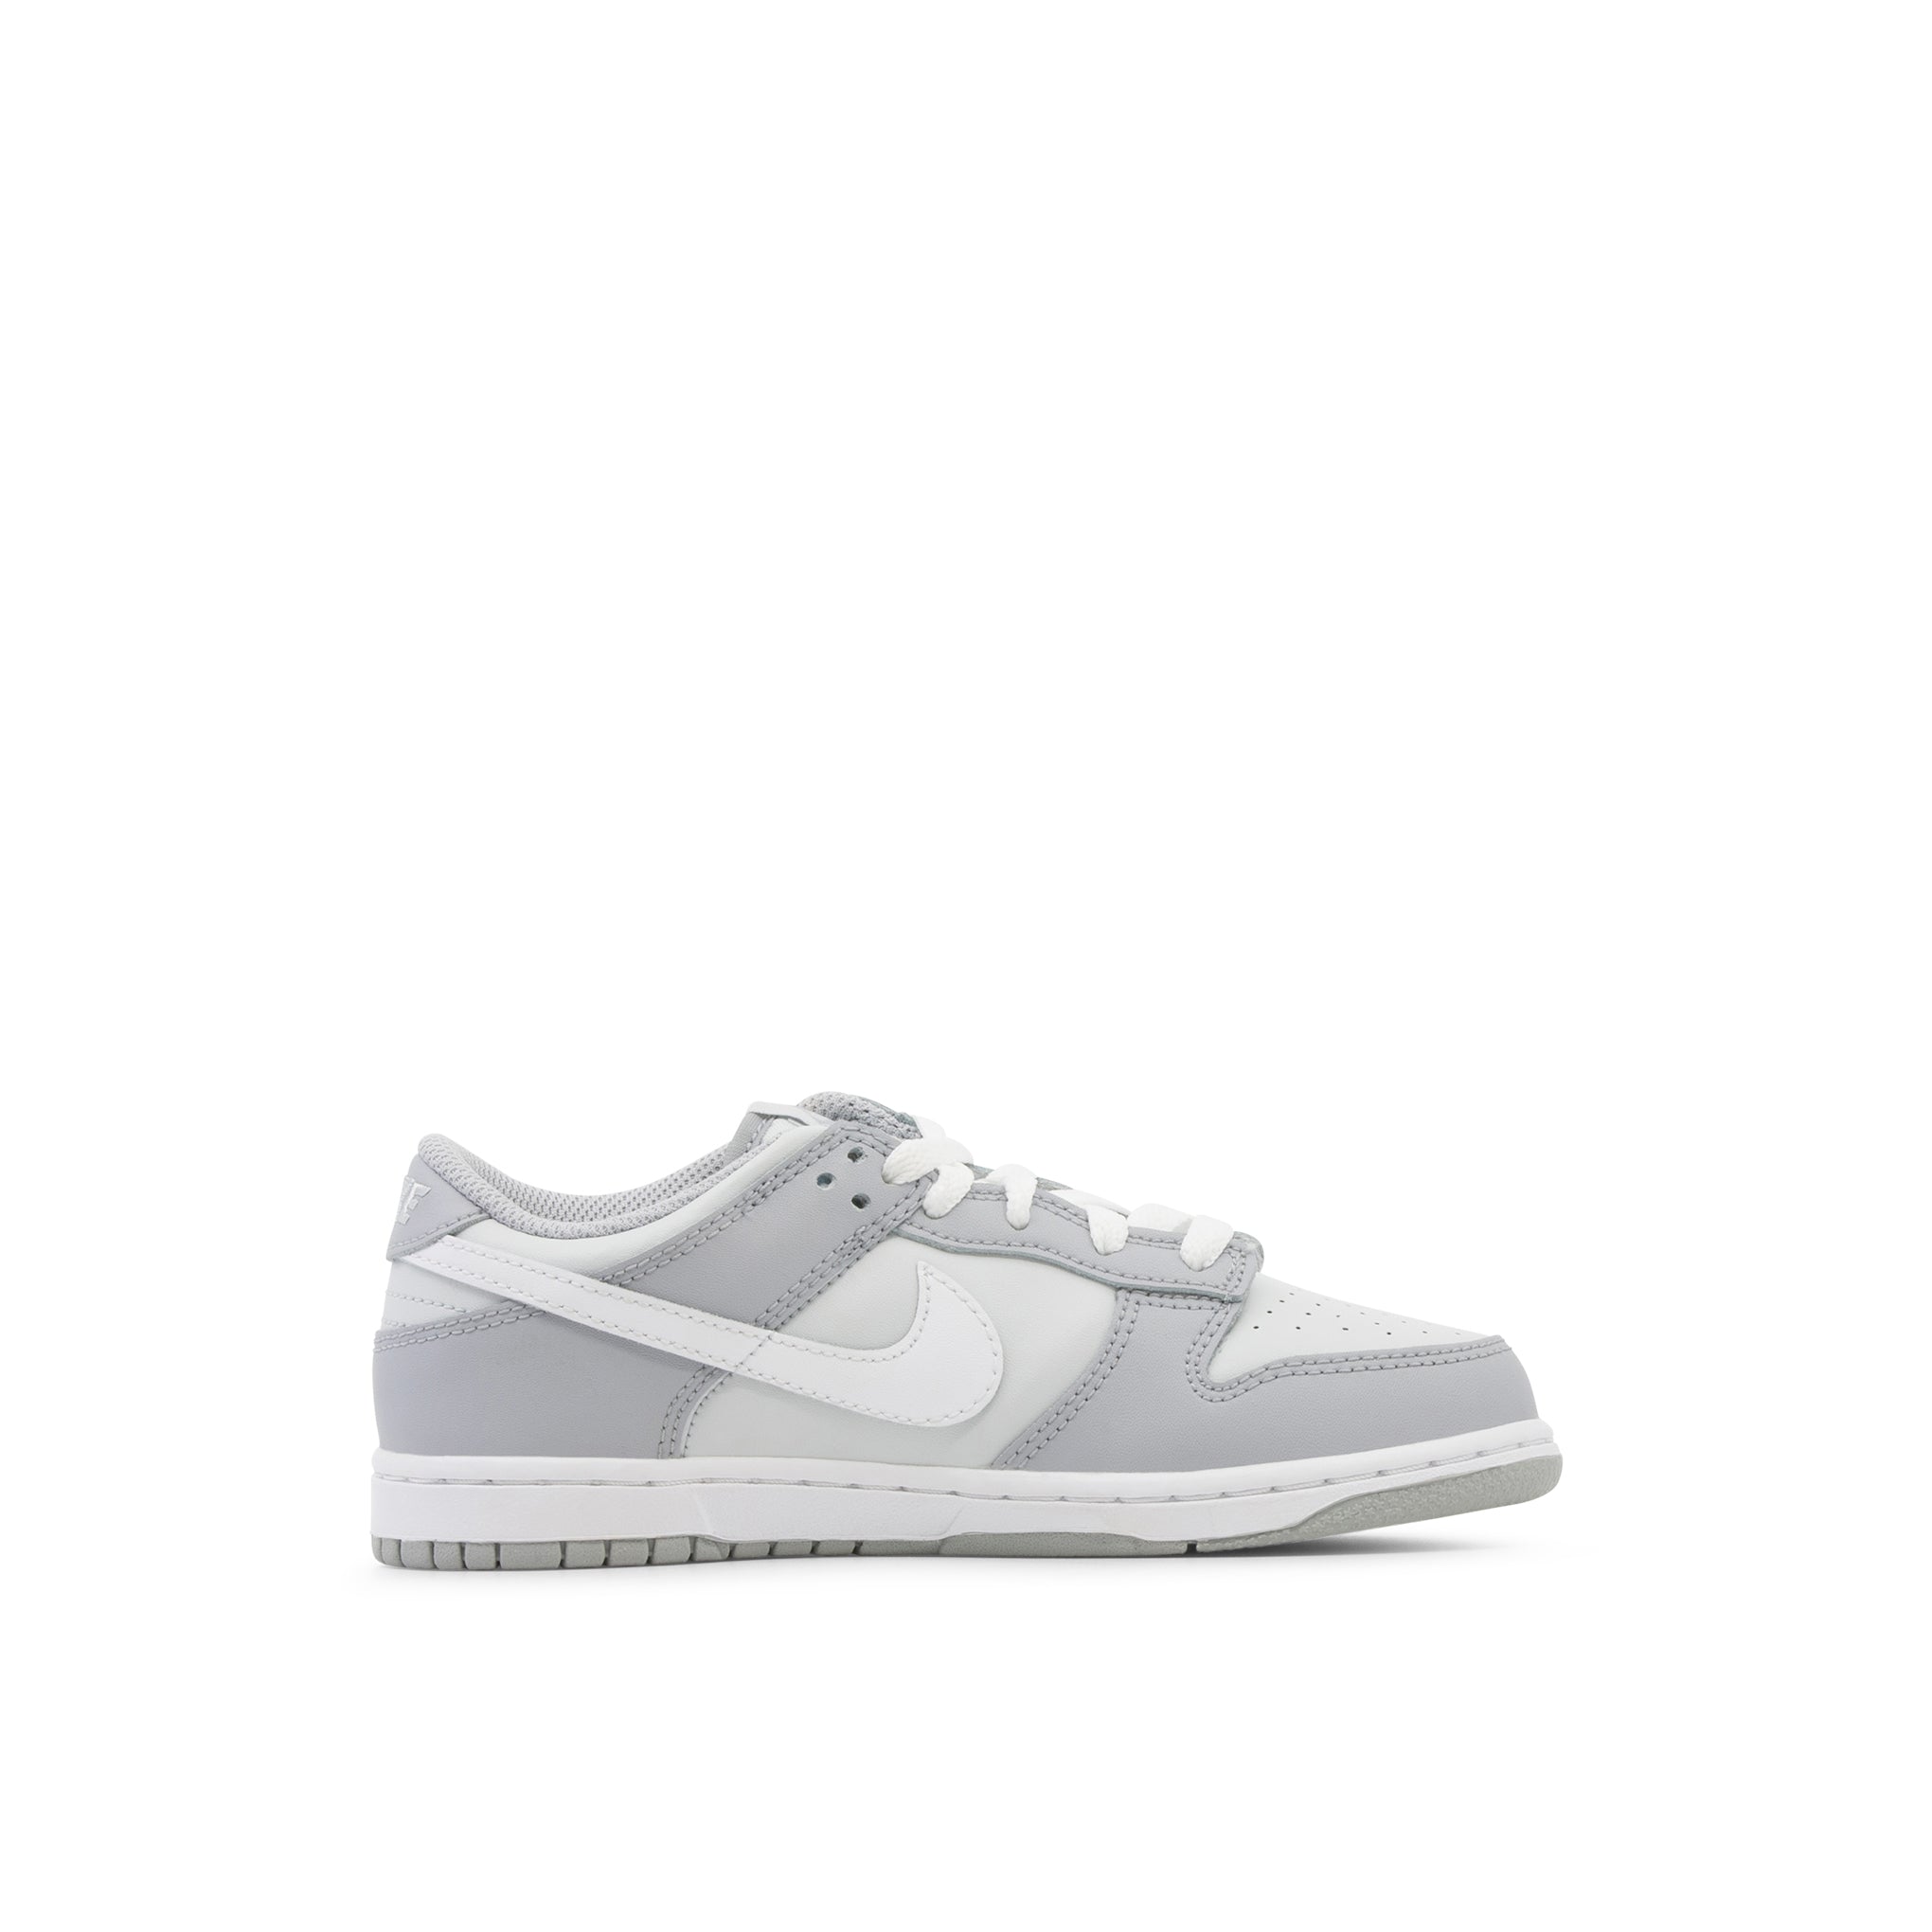 NIKE DUNK LOW PS TWO-TONE GREY